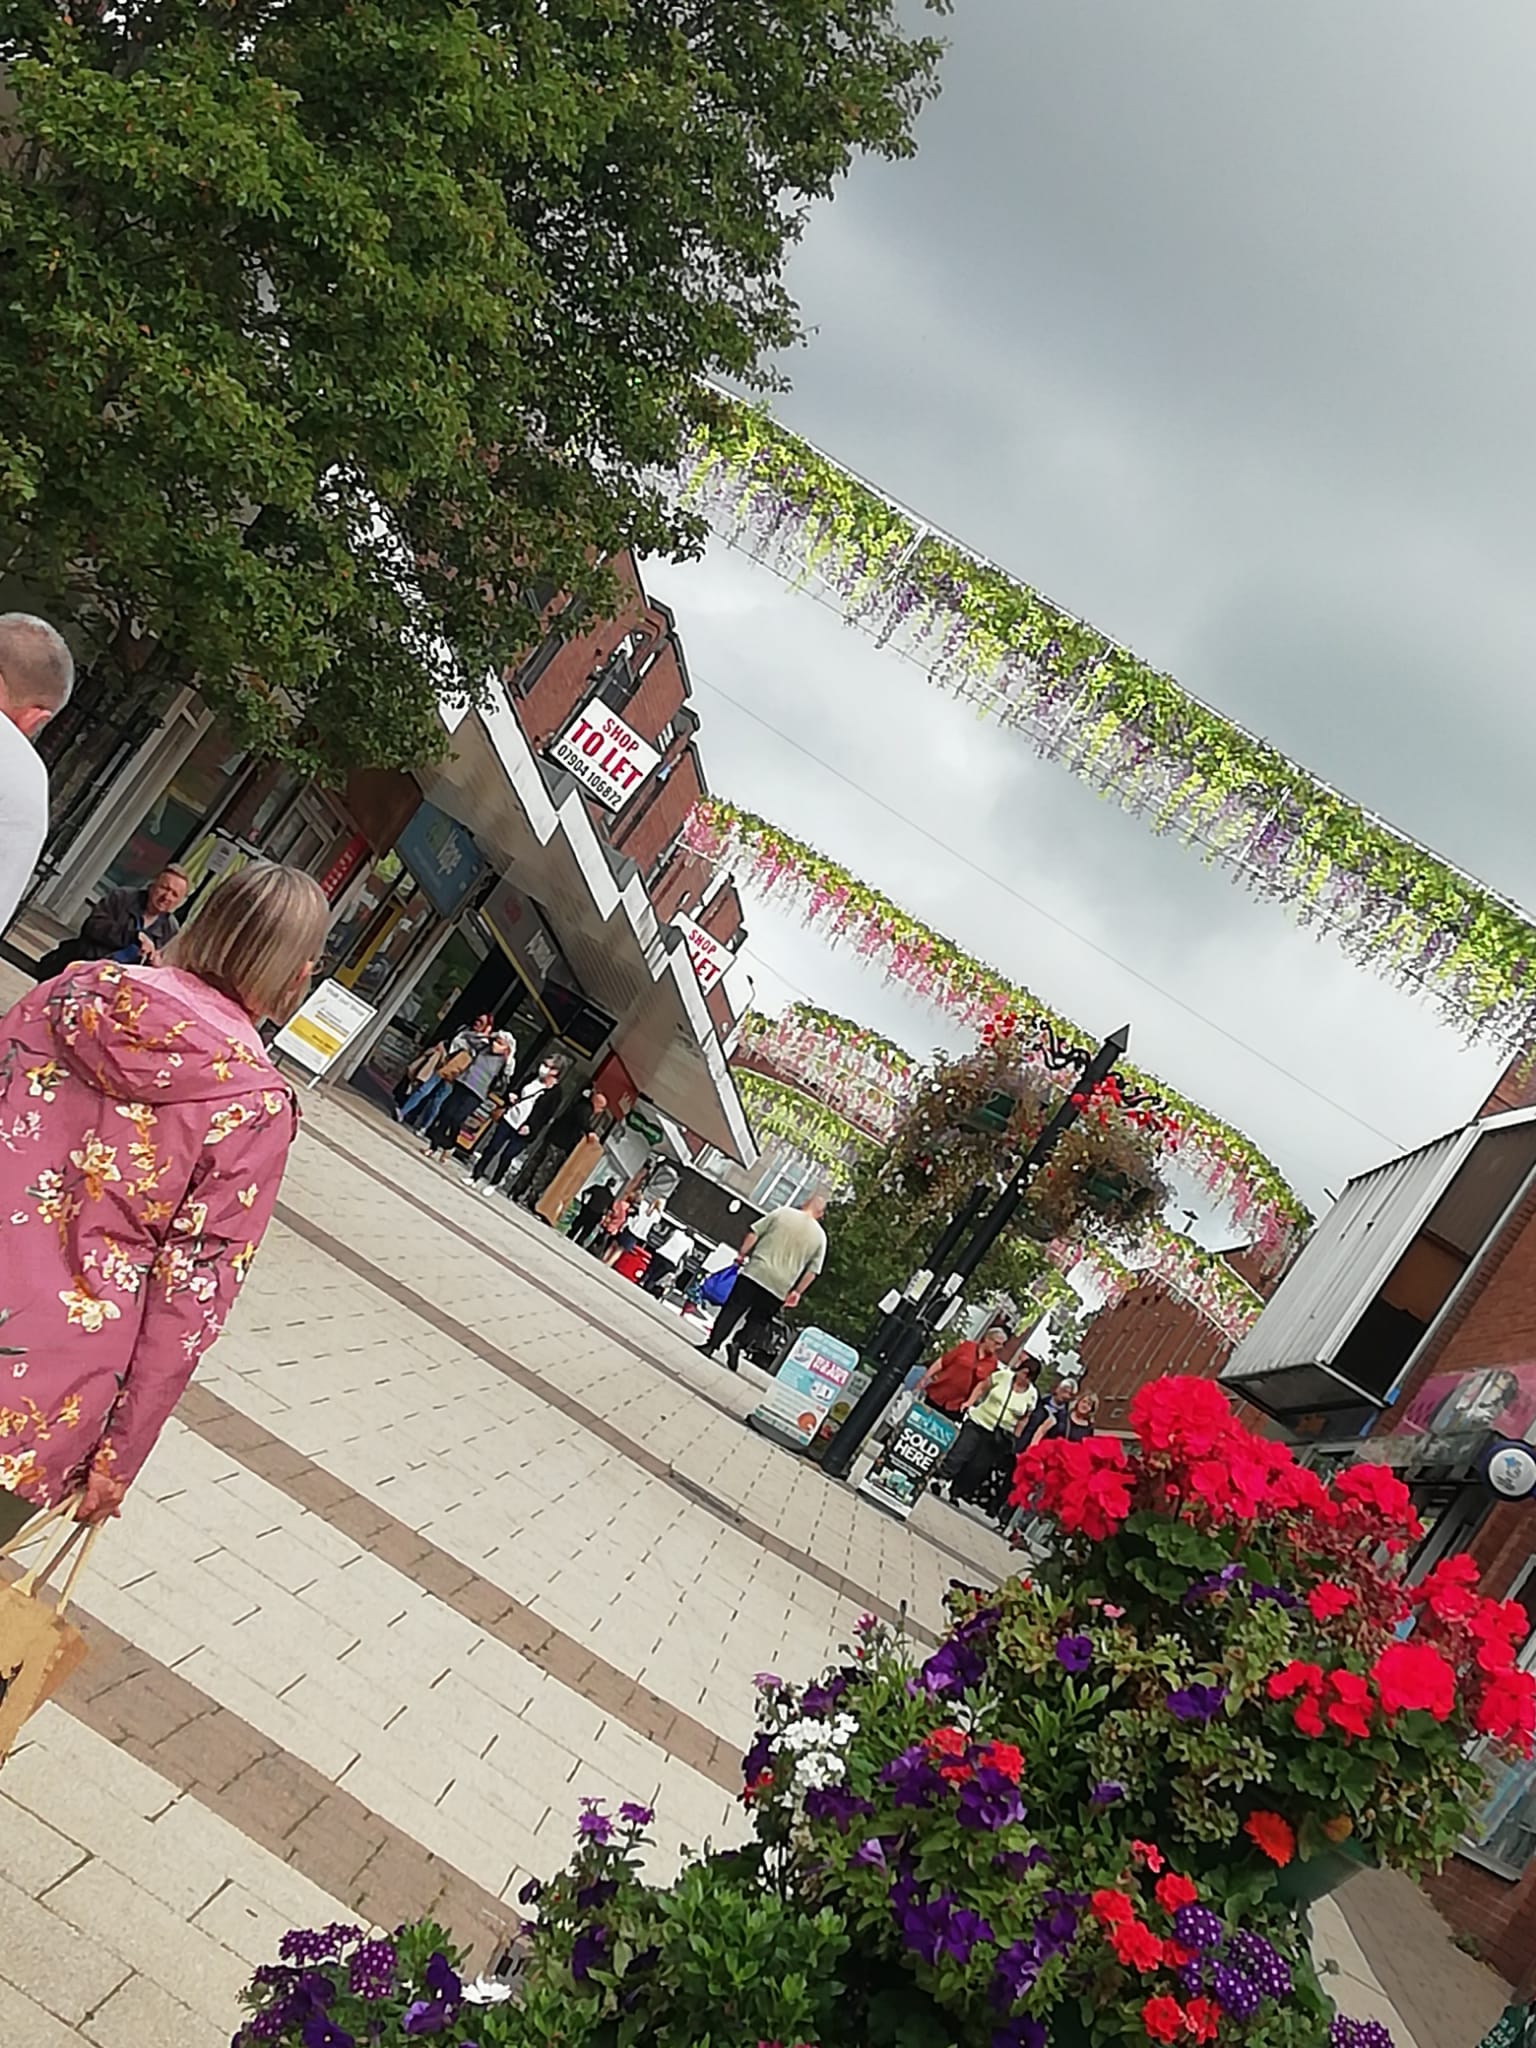 Alfreton town centre's new floral display